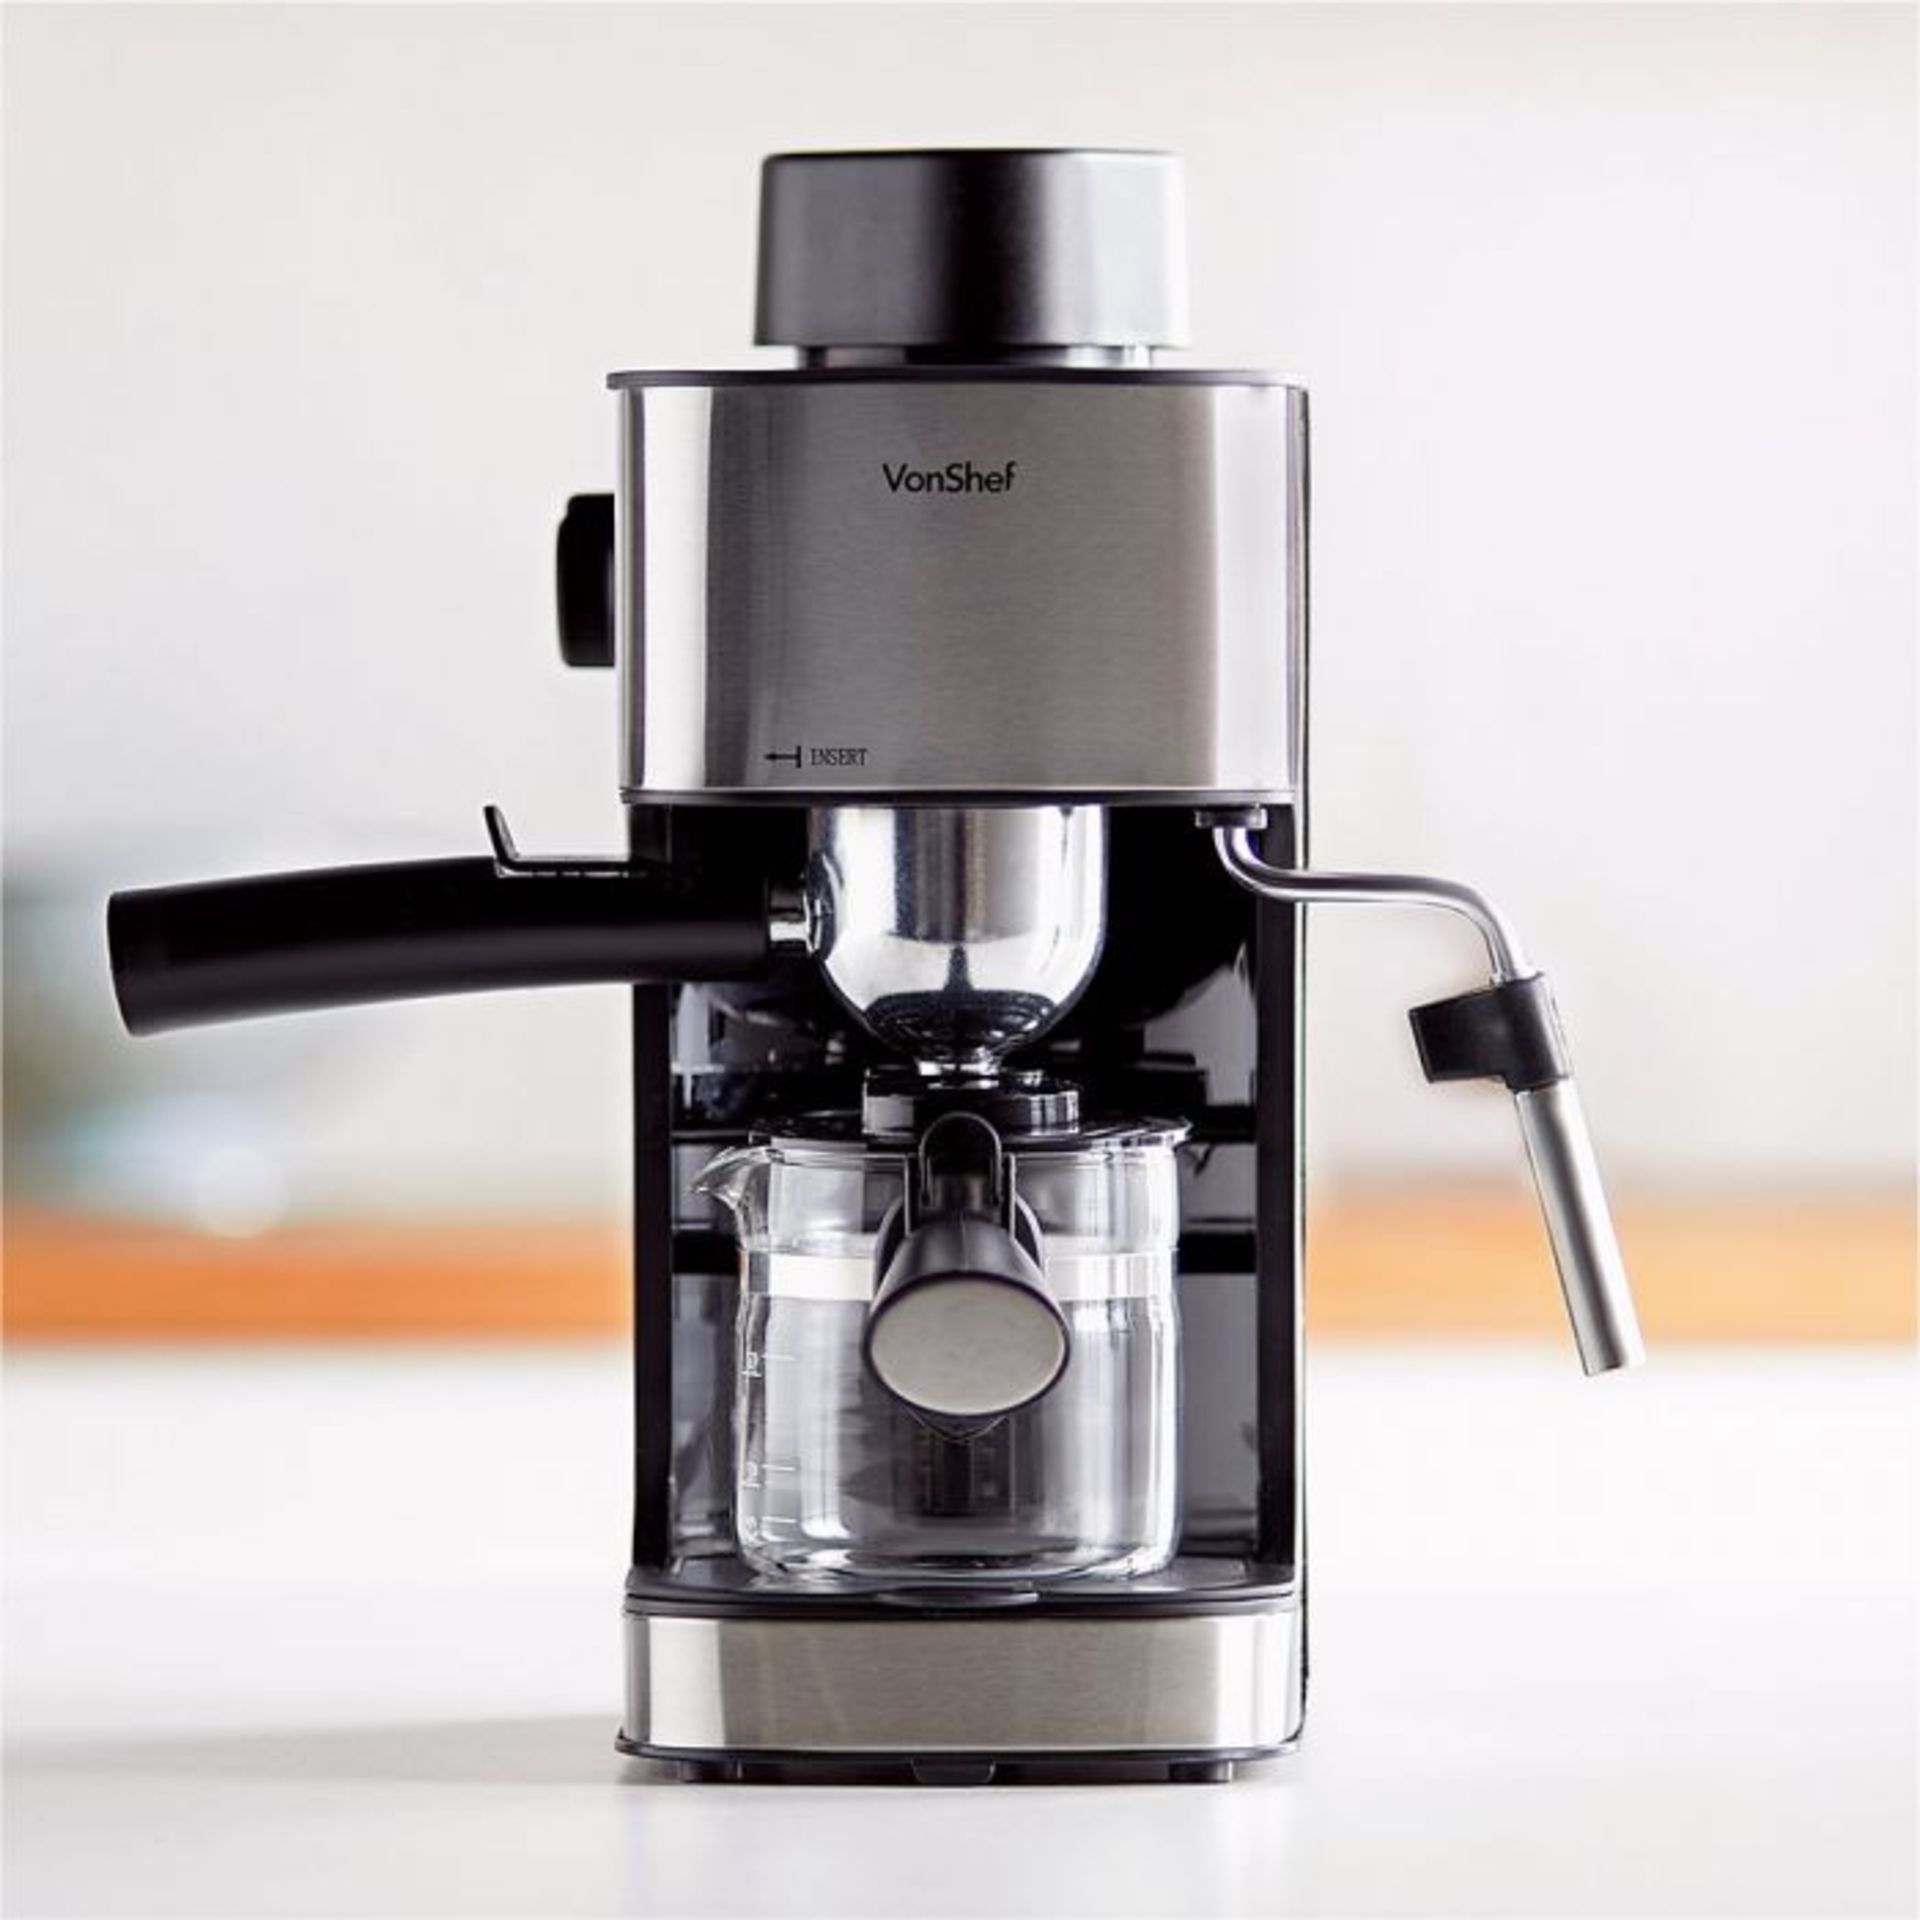 (NN8) 4 Bar Espresso Machine Features include a glass carafe that can hold enough for 4 espres...